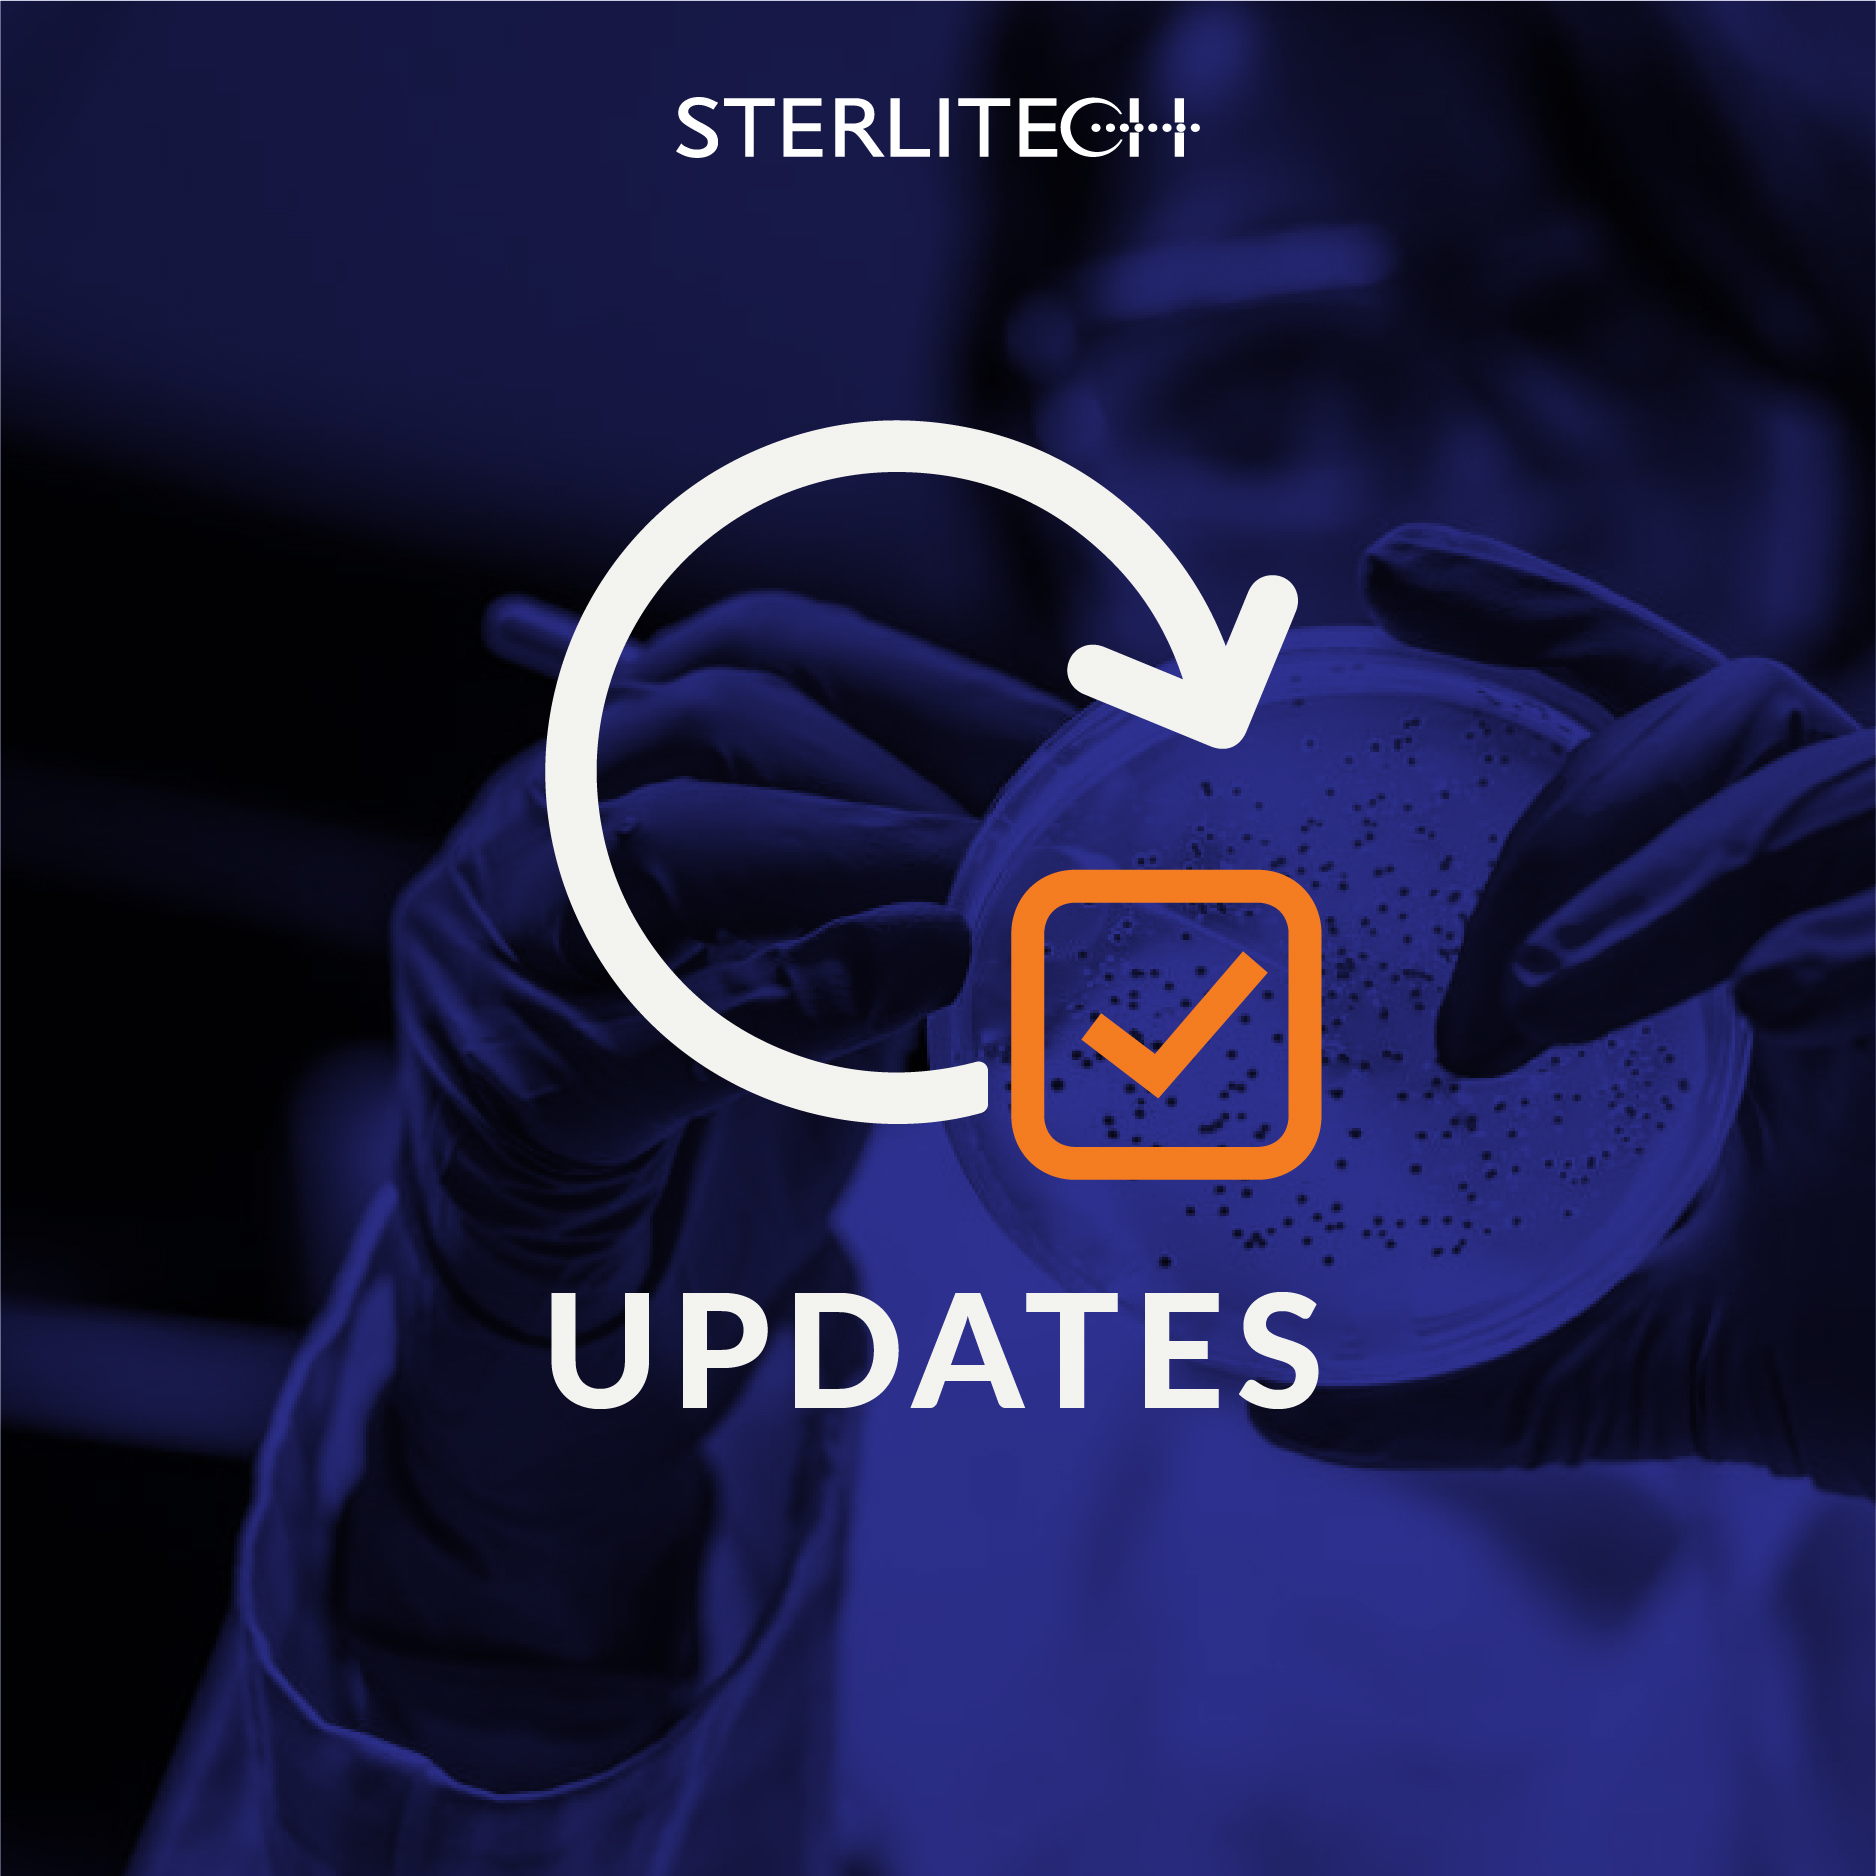 Stop by and See Sterlitech at Pittcon!